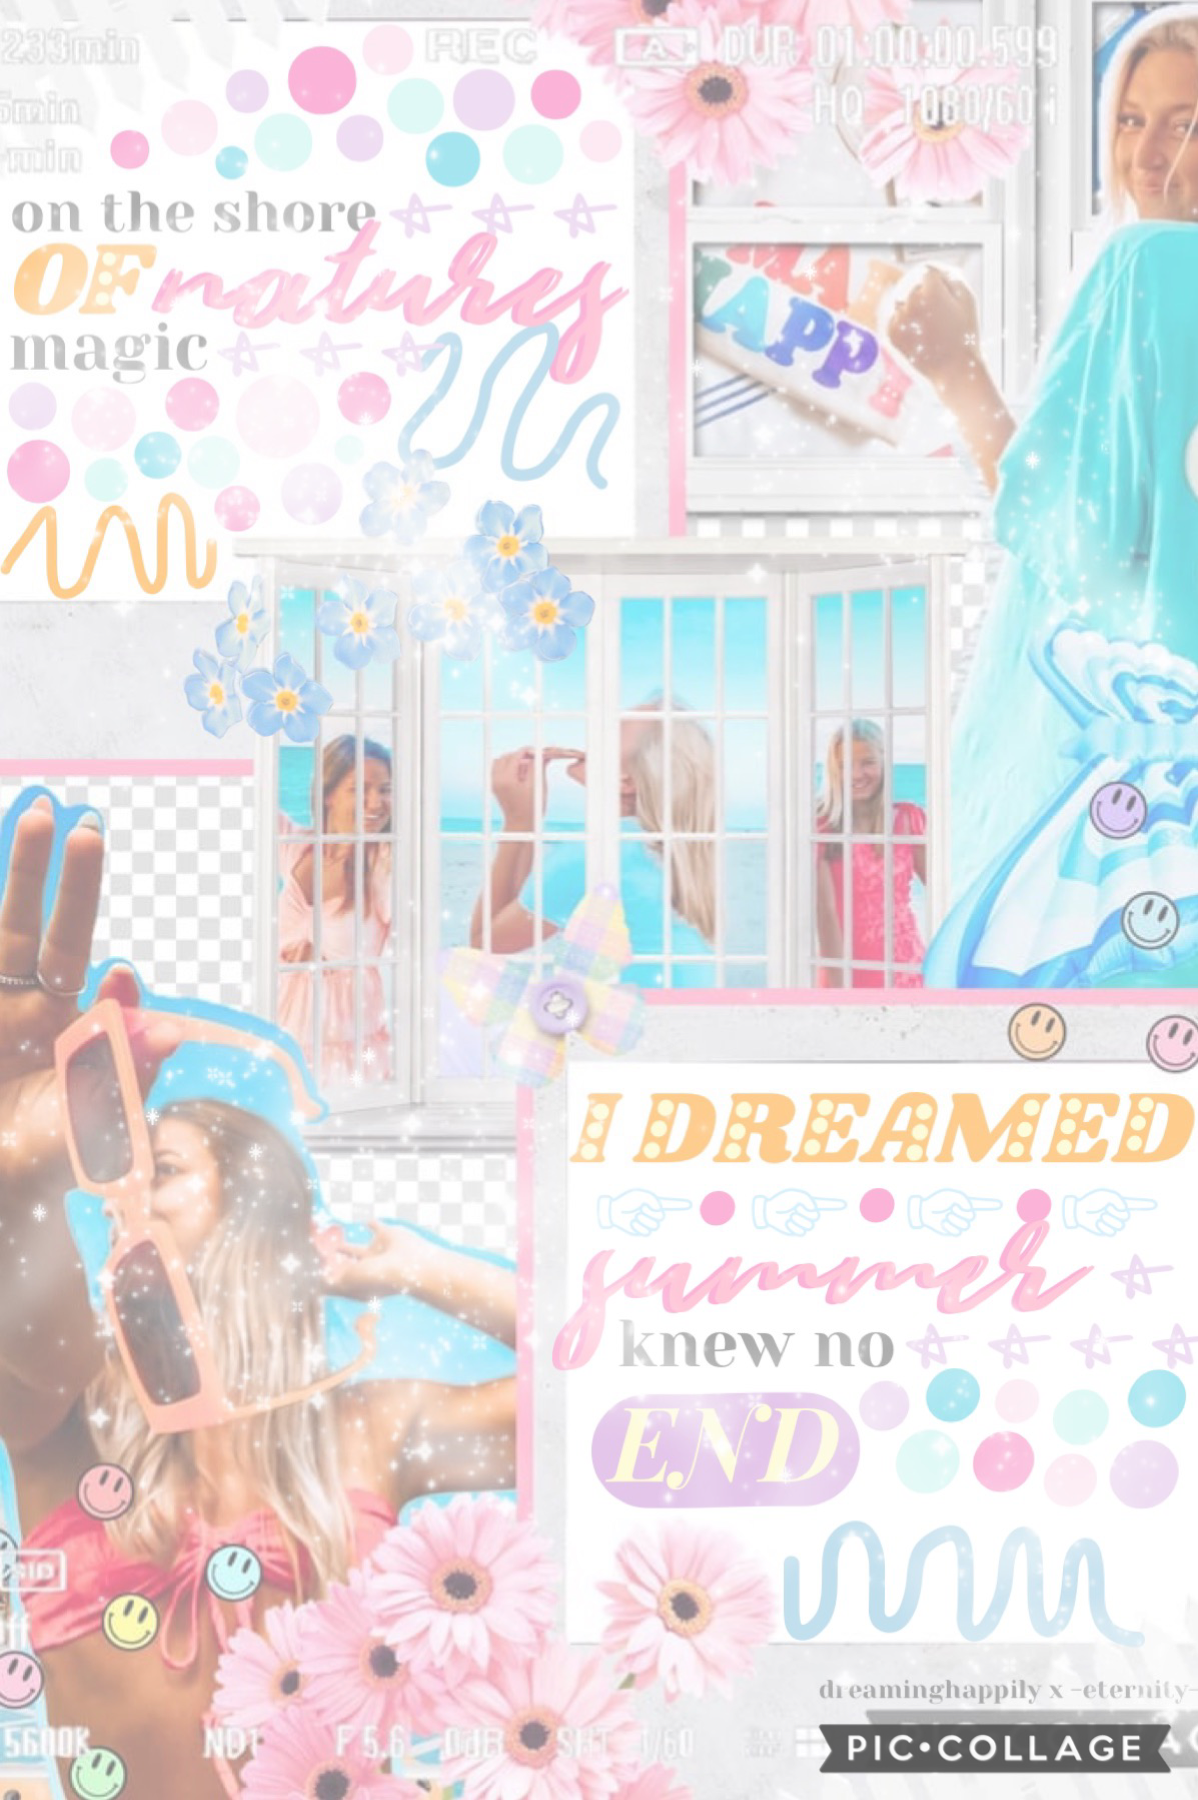 🌸collab with….🌸

the amazing dreaminghappily / i loved working with her and i’m so happy we did this collab / i did text and she did bg and i LOVE how it turned out 💕

qotd: fav emoji?
aotd: probably 🌴 or ☁️ at the moment